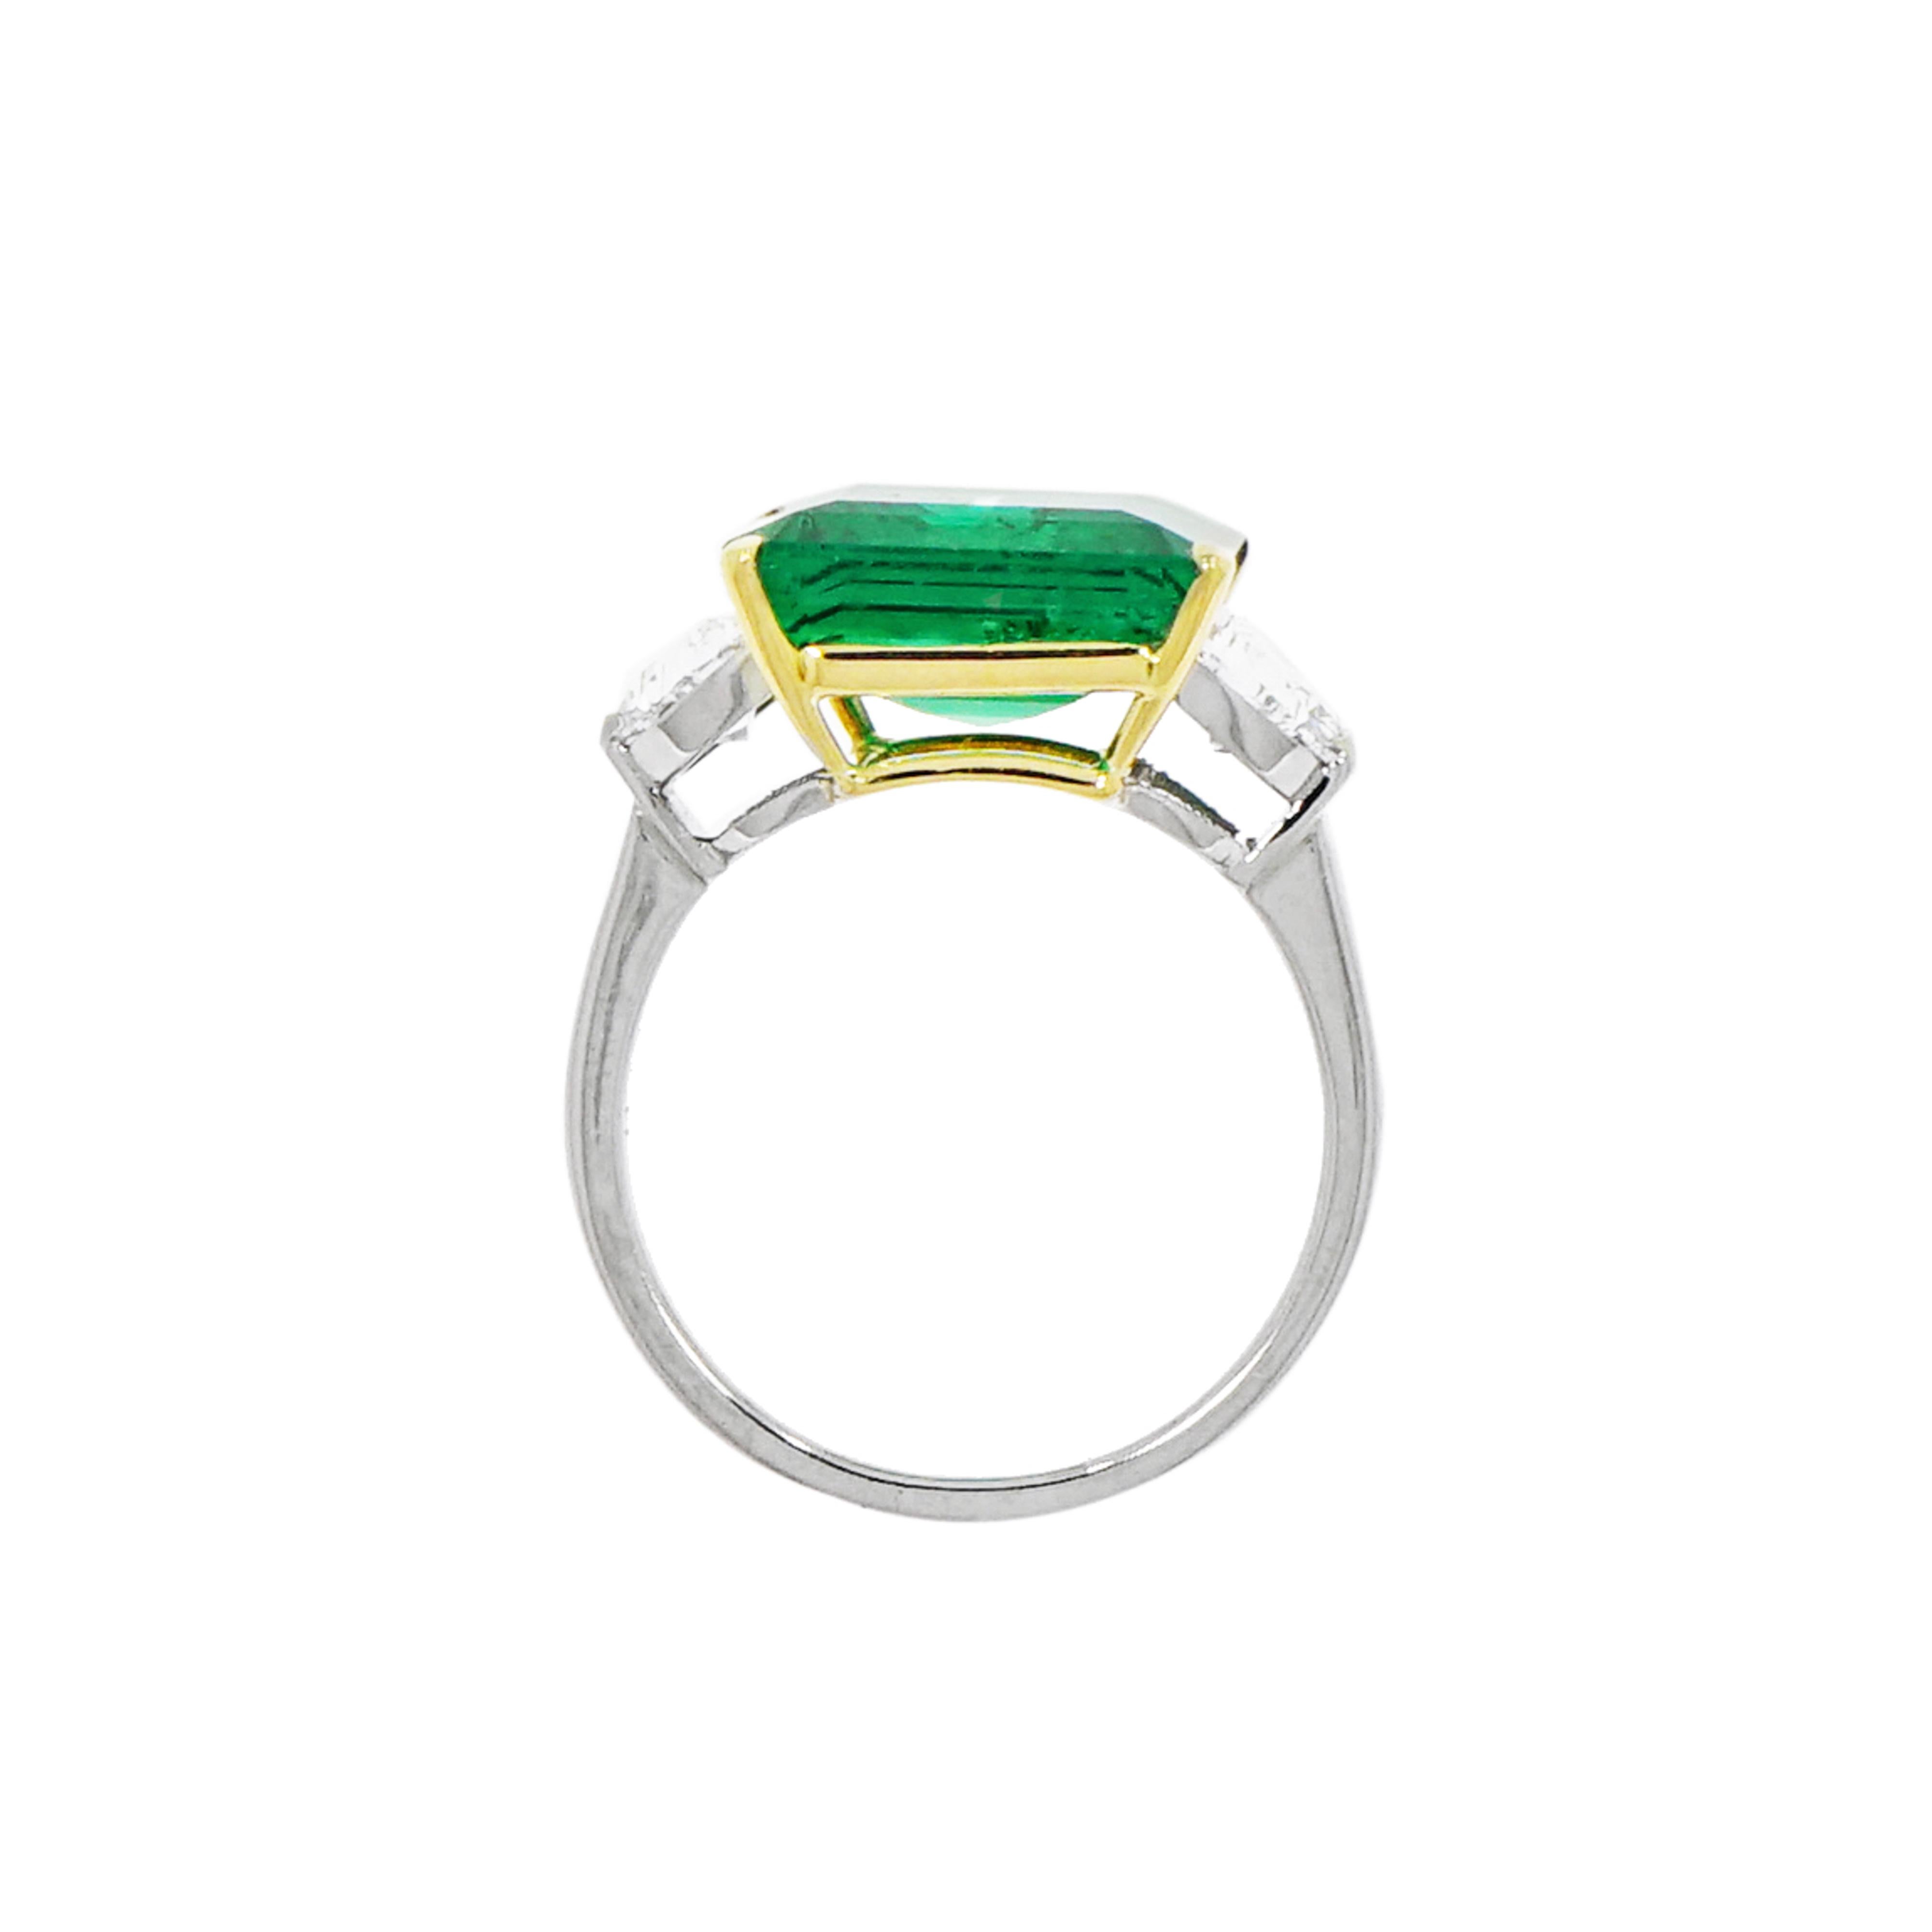 We love emeralds for their vibrant green color and the unique flair they give to any piece of jewelry. Emeralds are once again reaching popularity with those in love, with a unique solitaire ring offering an alternative to diamonds.
This Emerald and